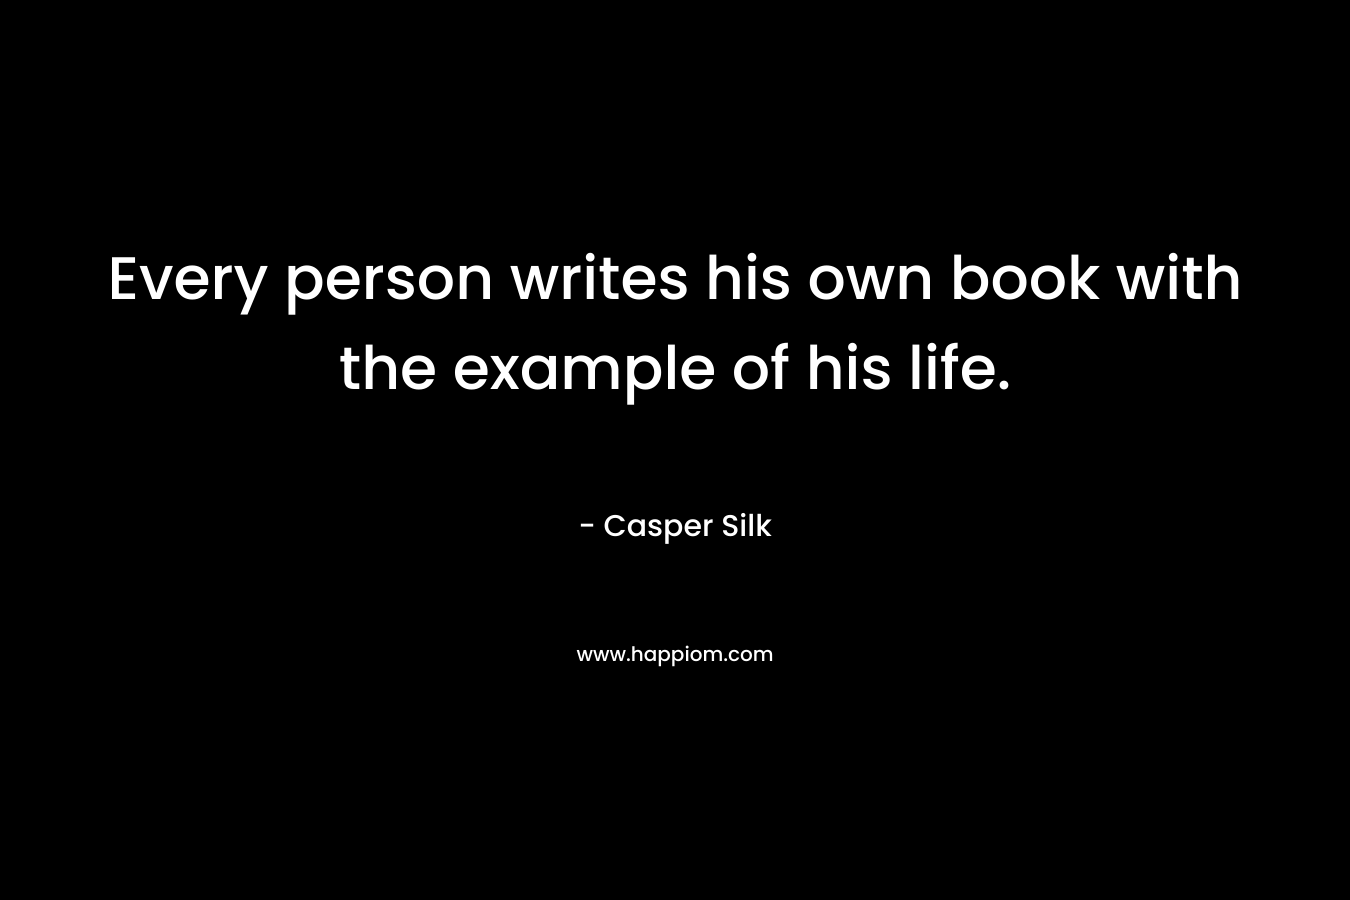 Every person writes his own book with the example of his life. – Casper Silk